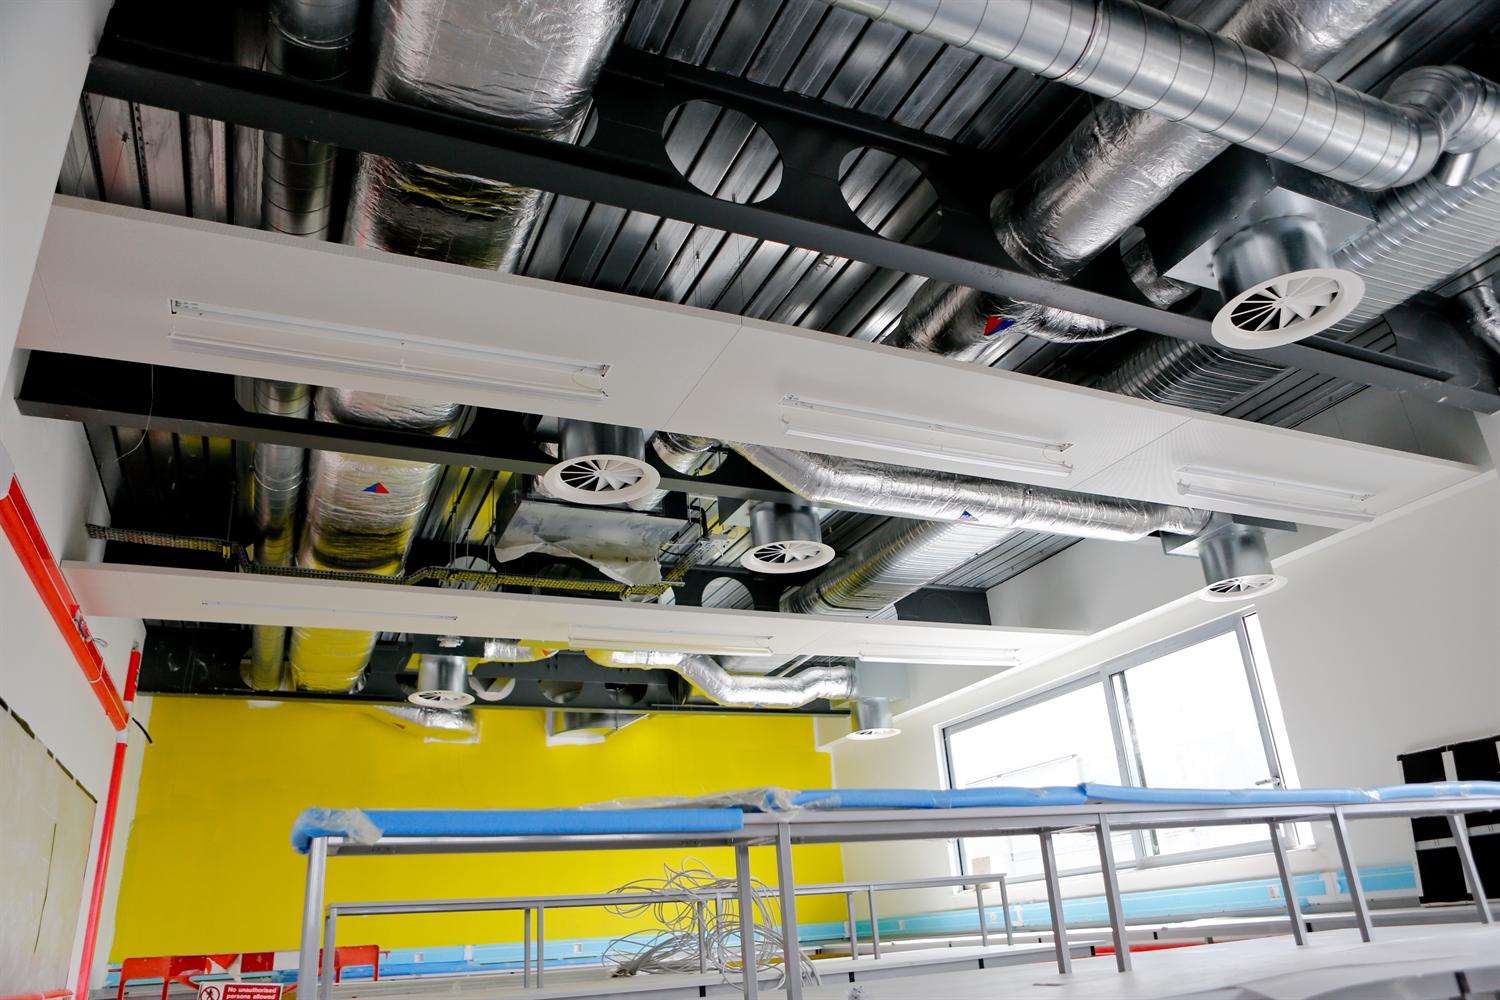 The open ceiling at Leigh UTC will be used as an educational tool for engineering and construction students